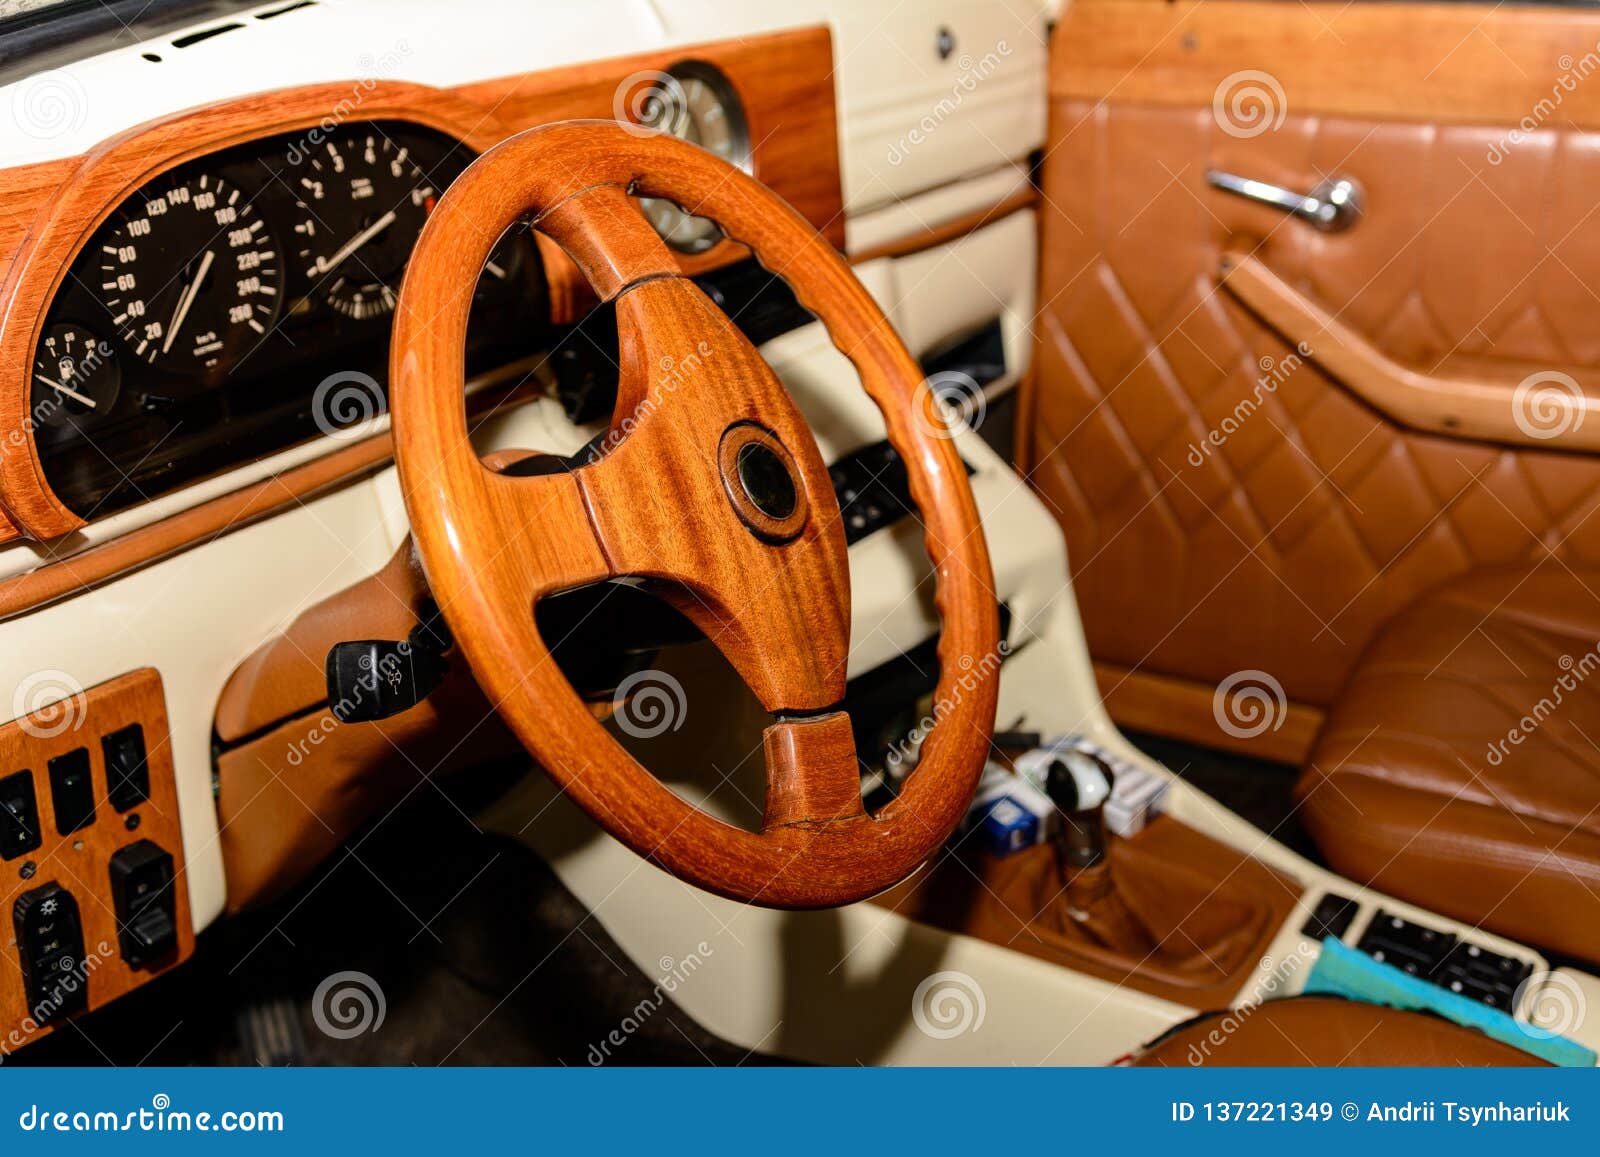 Interior Of The Car Is A Brown Color And Leather Stock Image